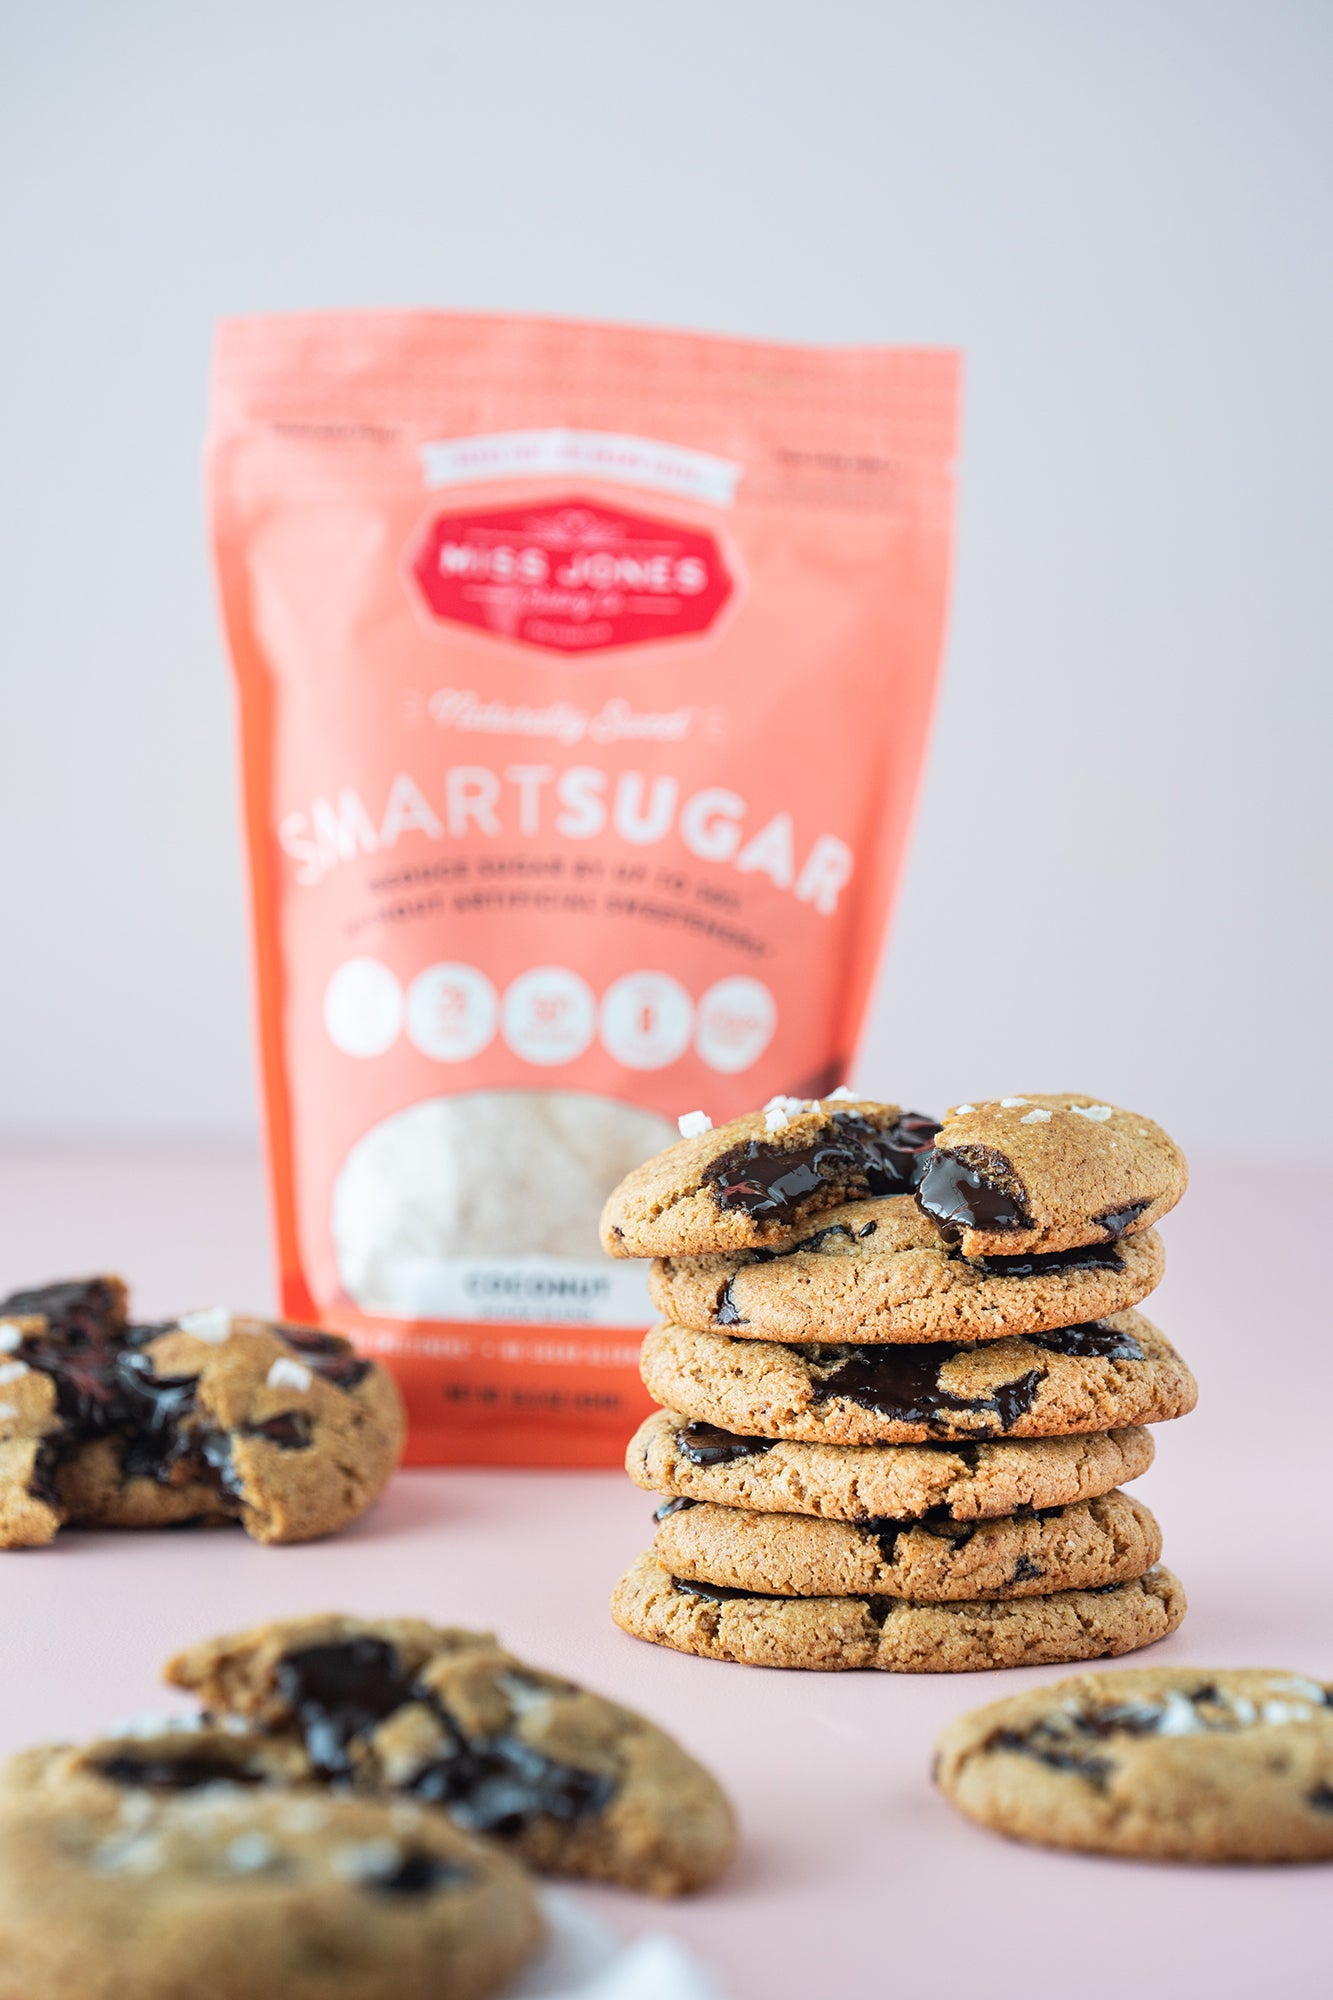 Image of stacked Miss Jones Baking Co Paleo Chocolate Chip Cookies in front of a bag of SmartSugar Coconut Sugar Blend